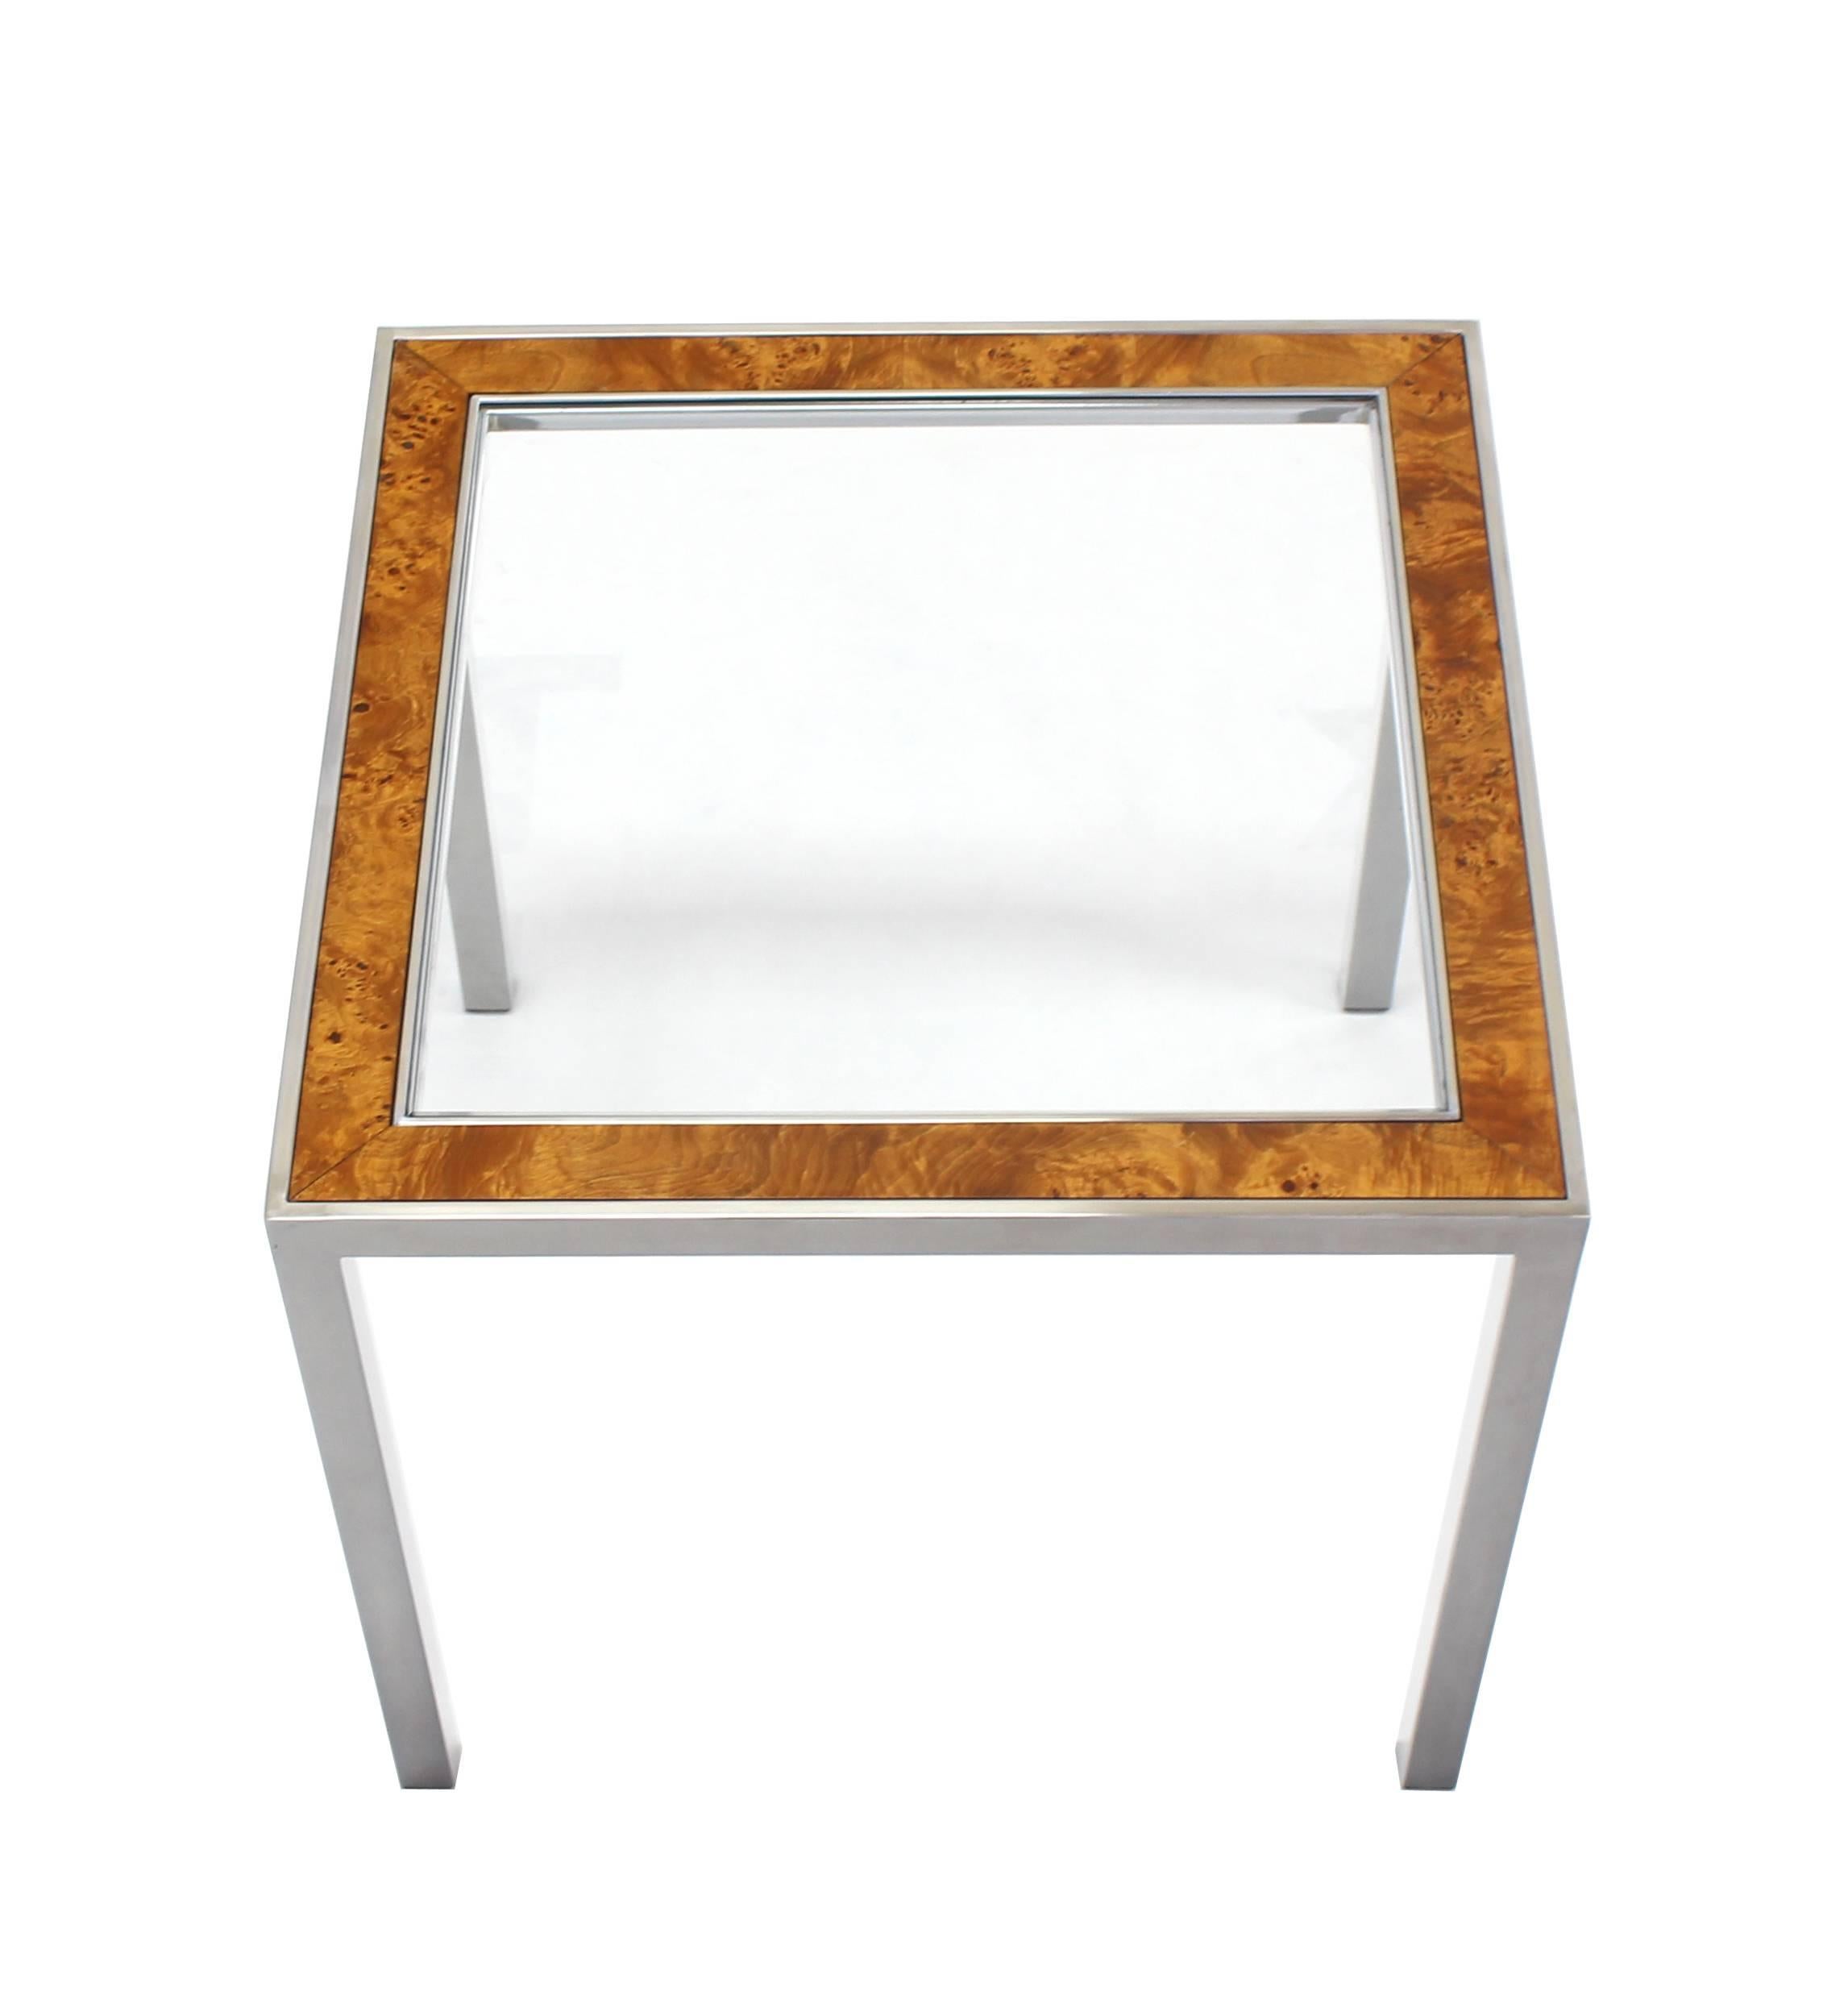 20th Century Chrome Burl Wood Glass Square Side Table For Sale